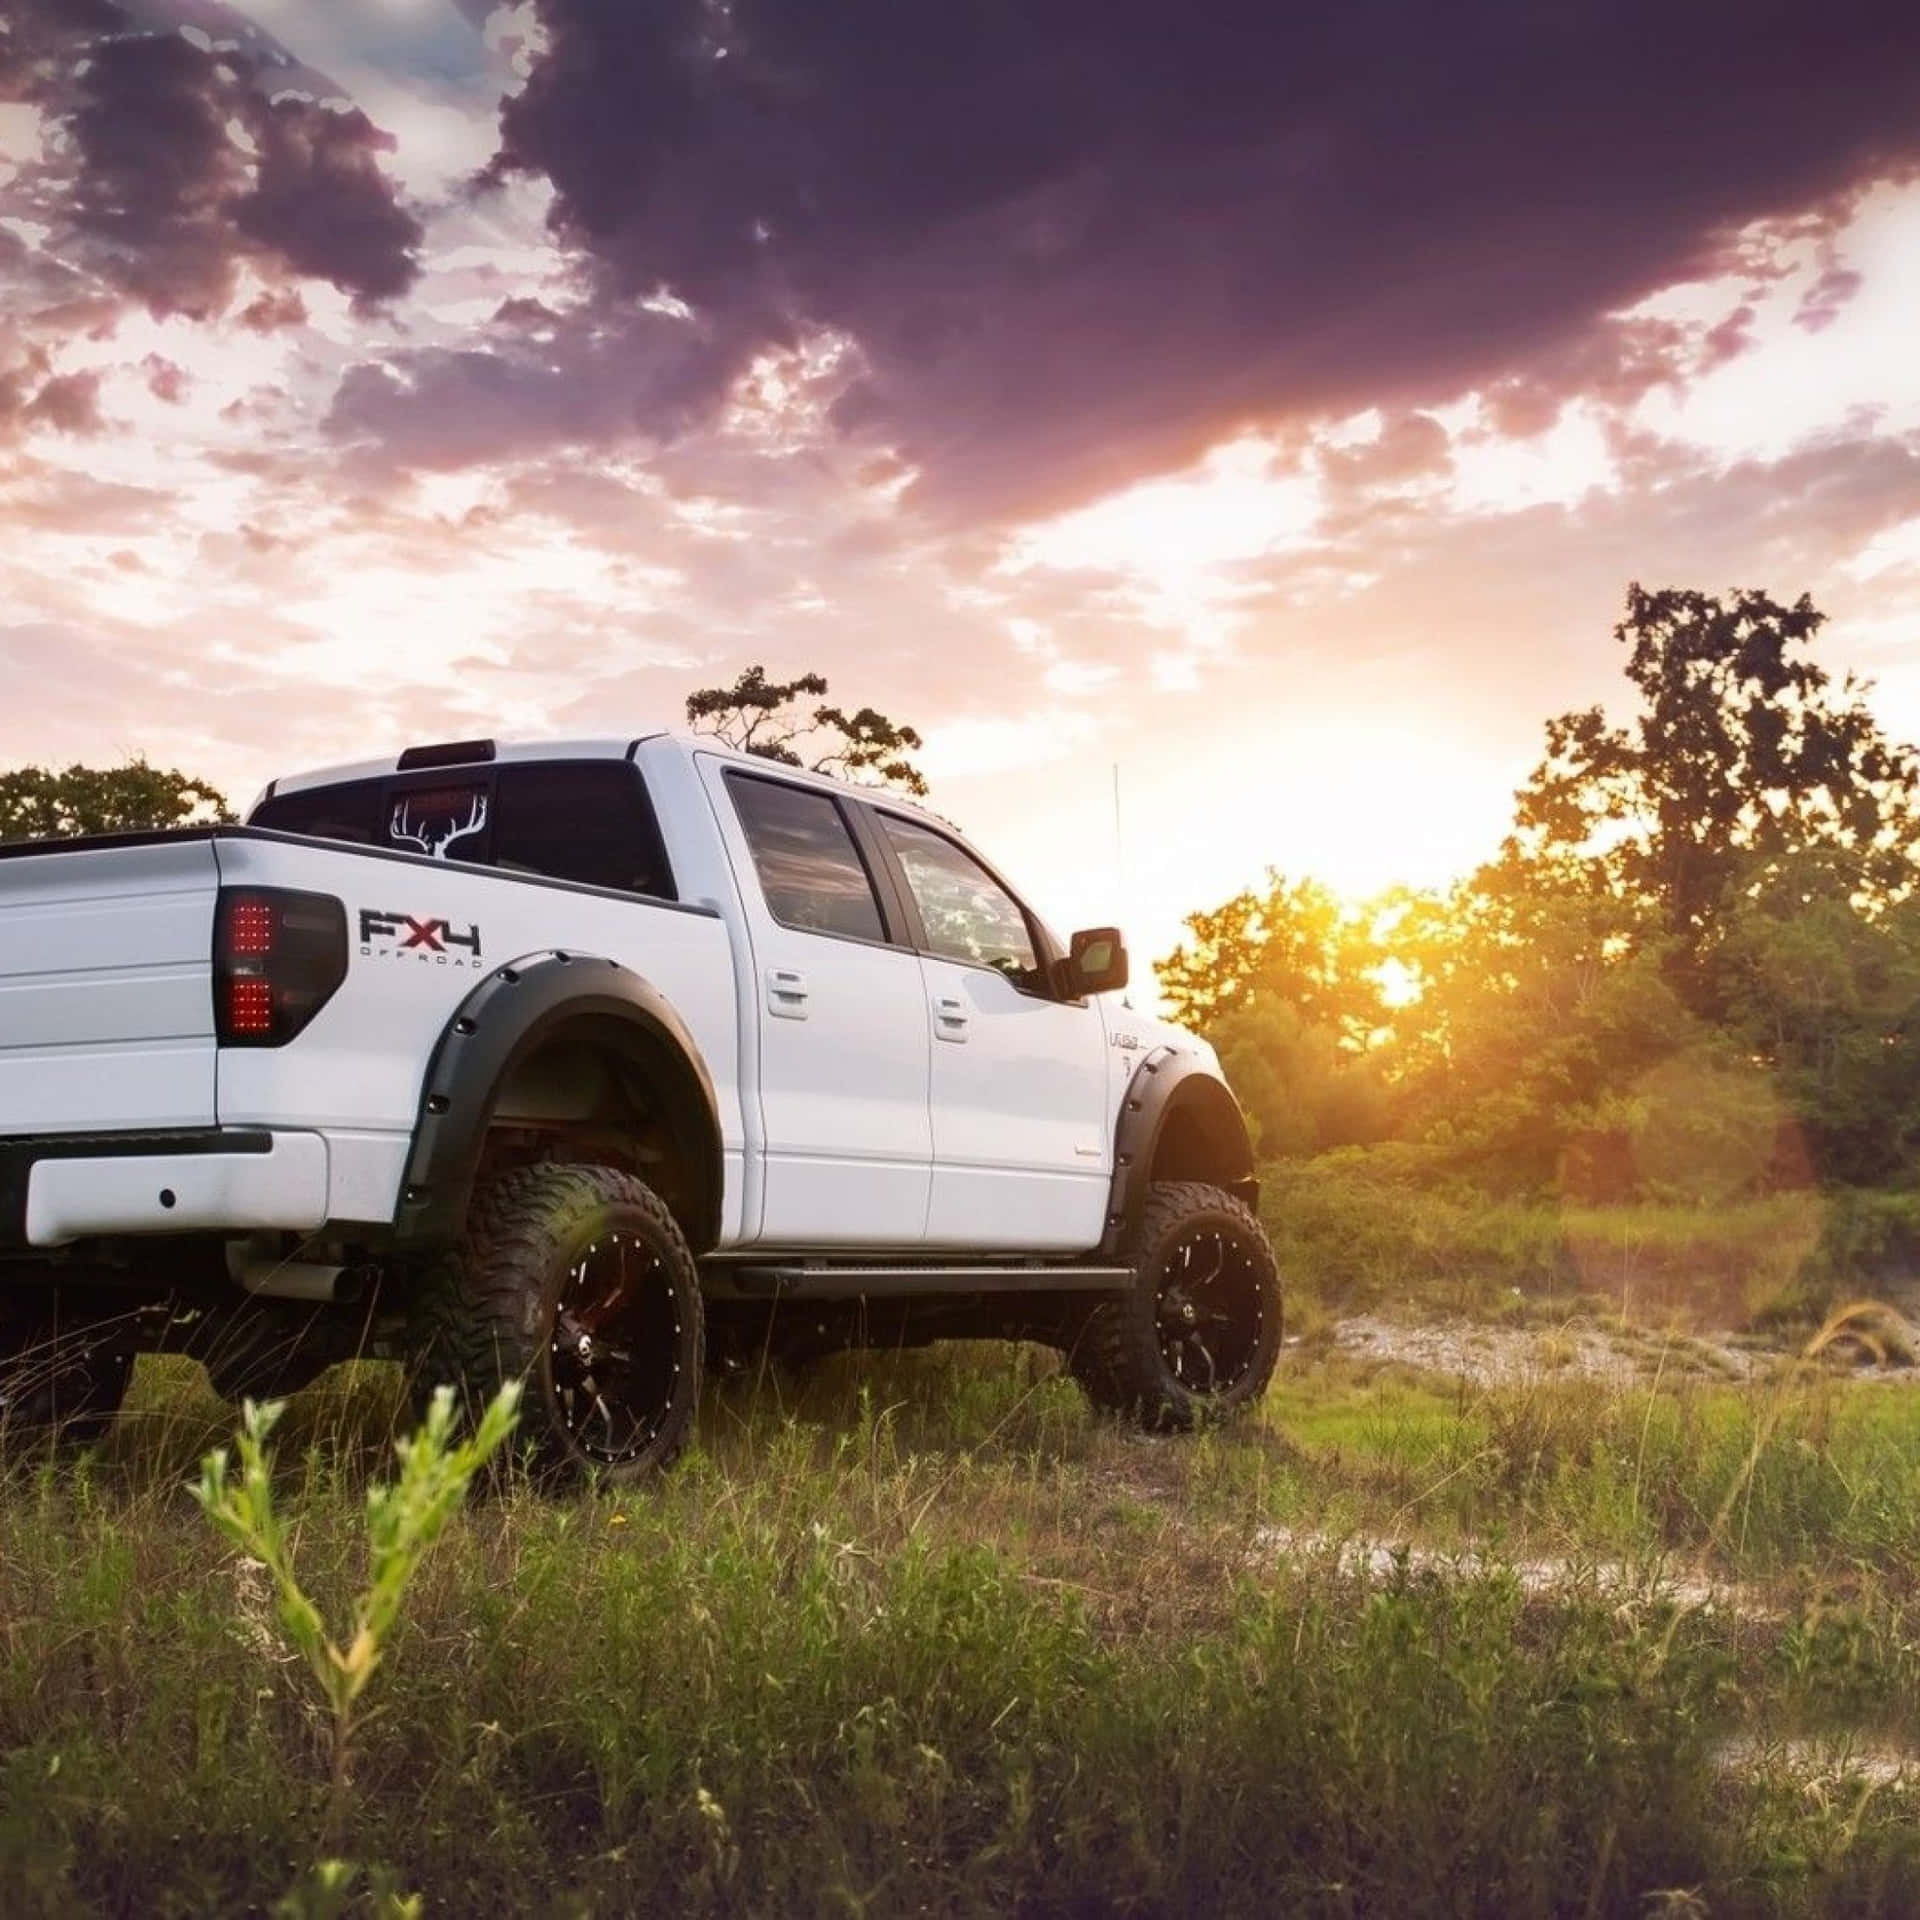 A White Truck Parked In A Field At Sunset Wallpaper